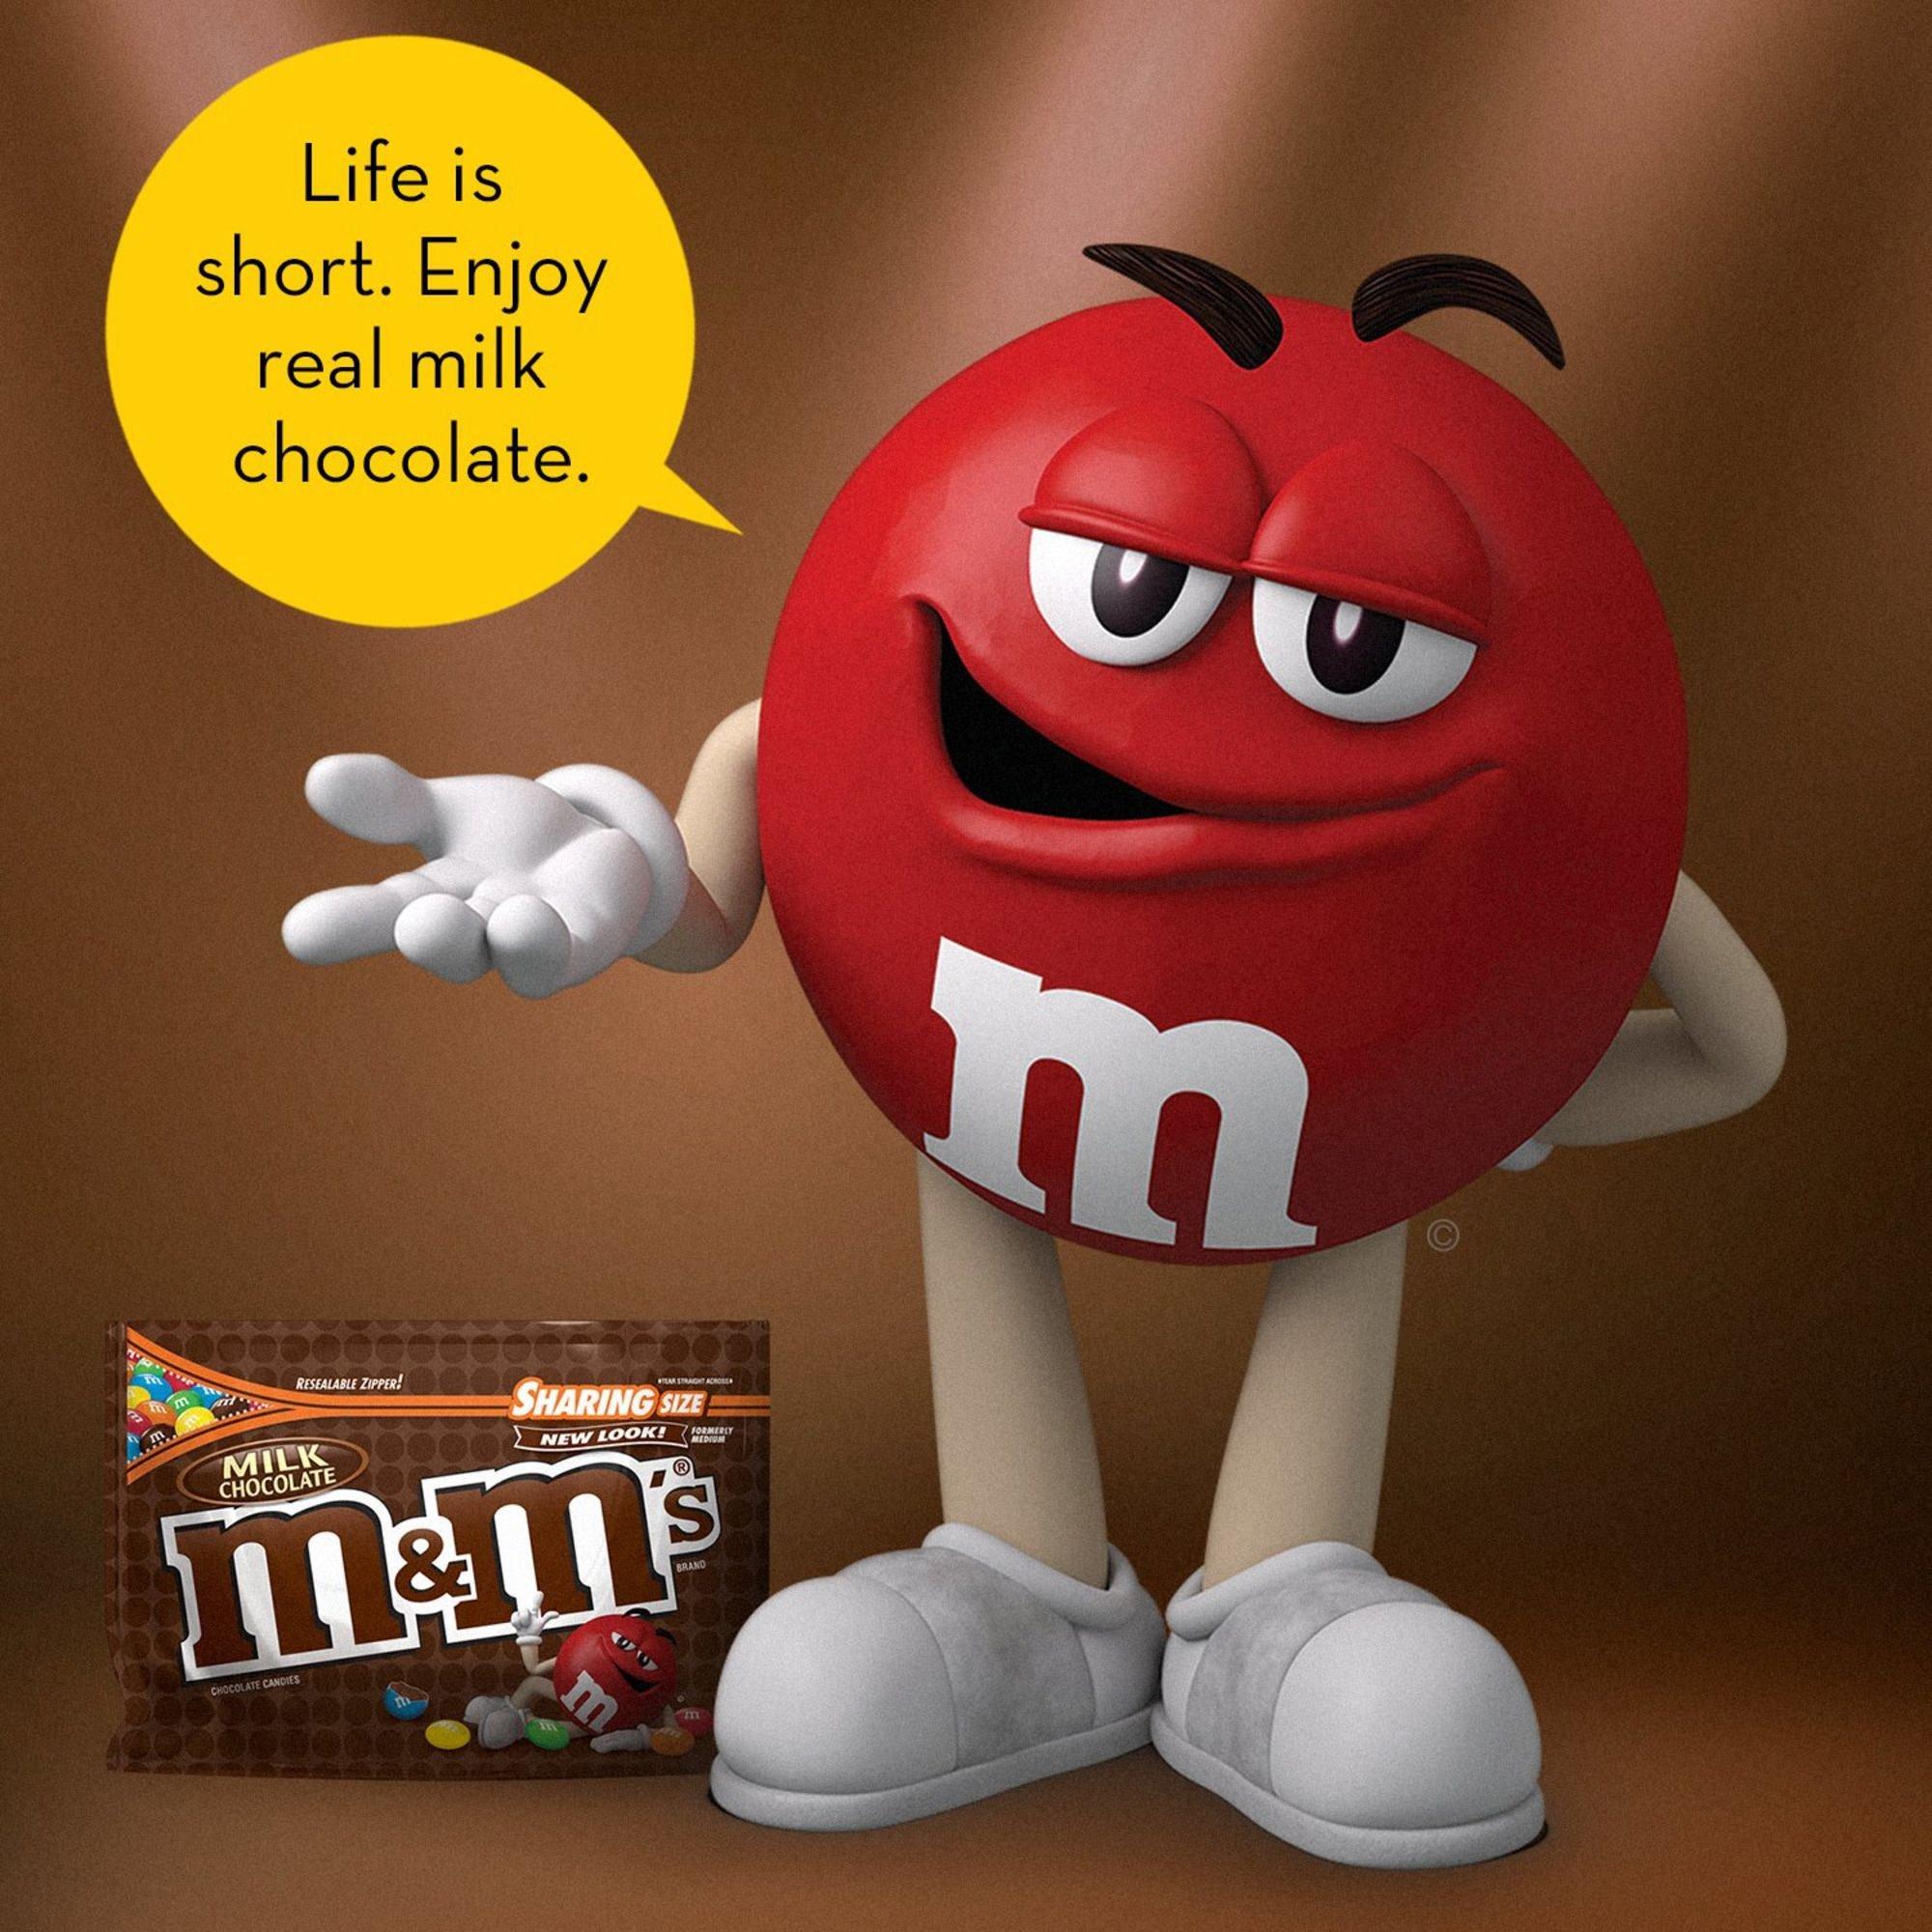 M&M's Milk Chocolate Candy Share Size